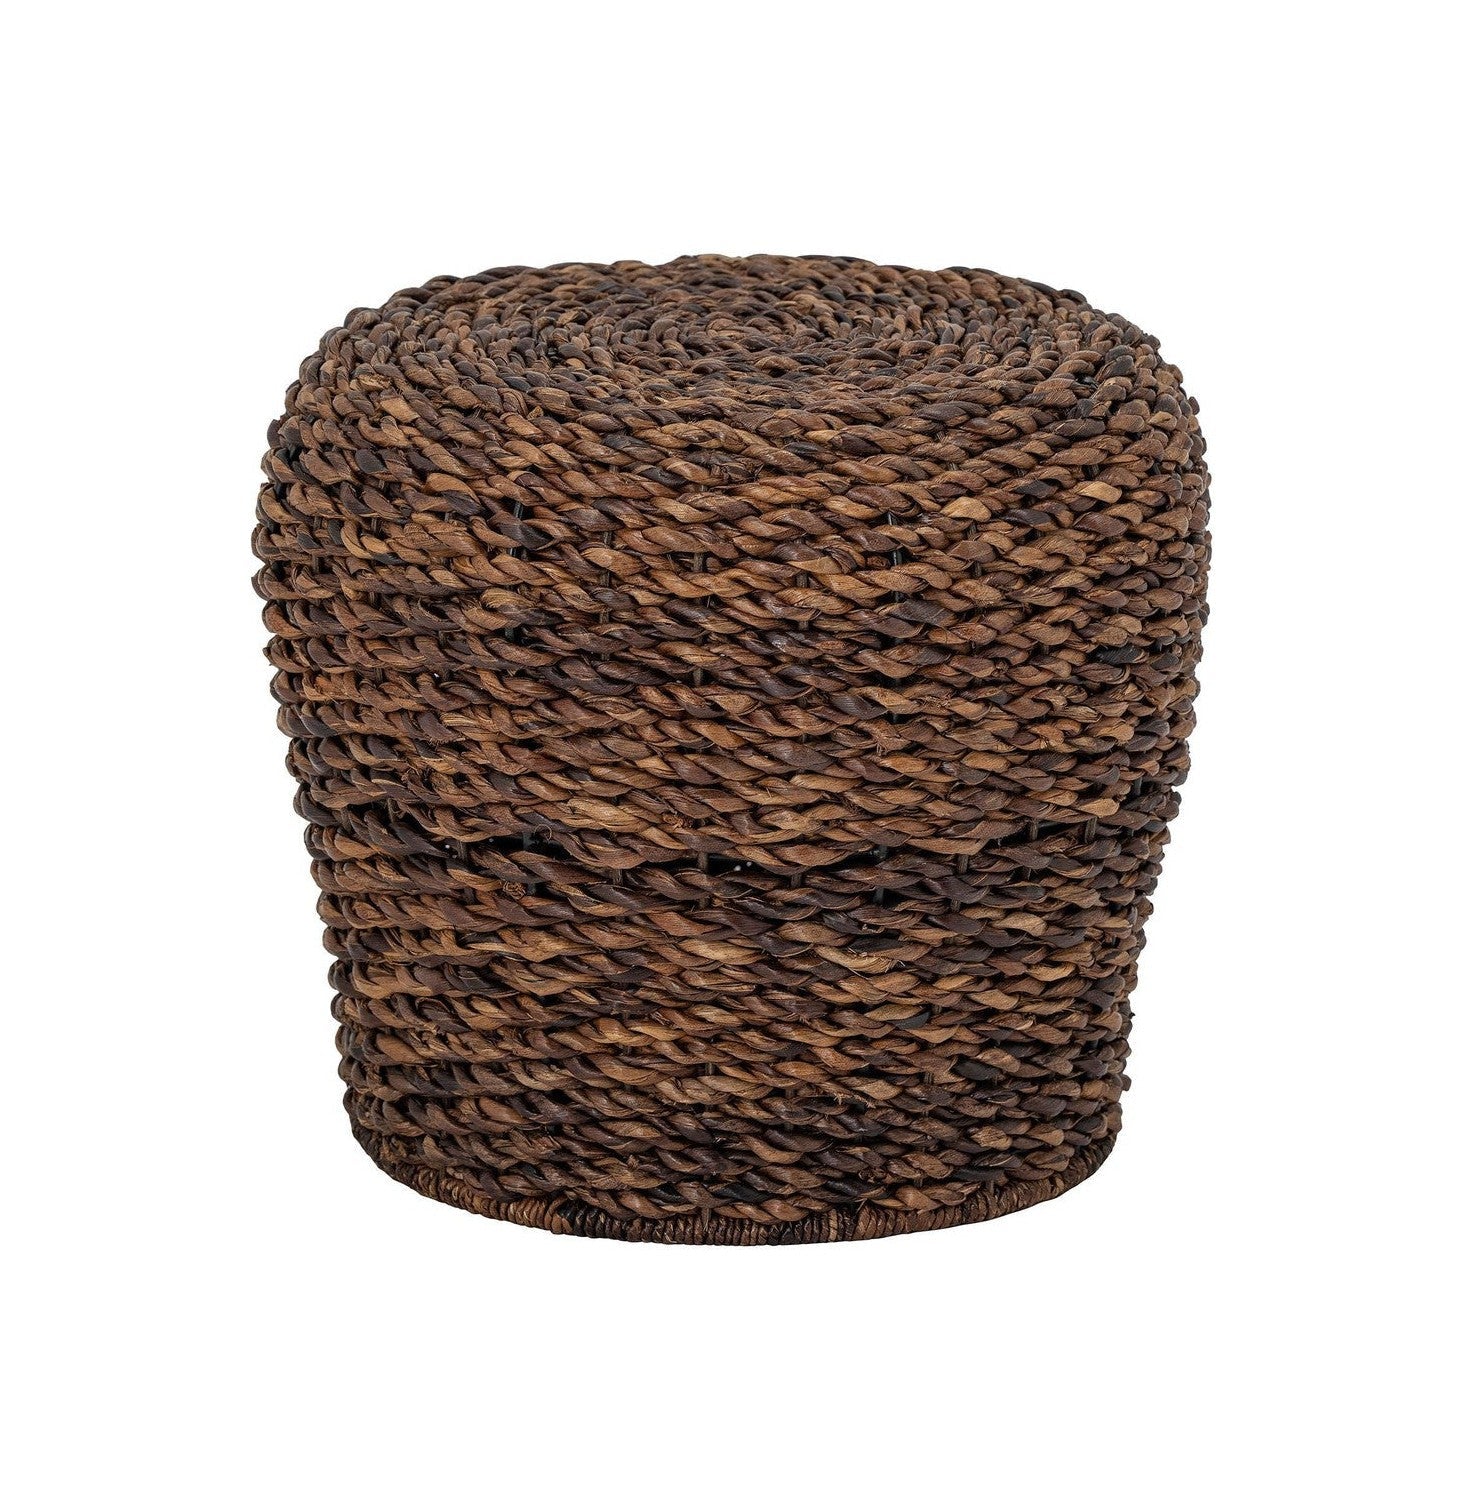 Creative Collection Tasse Stool, Brown, Abaca